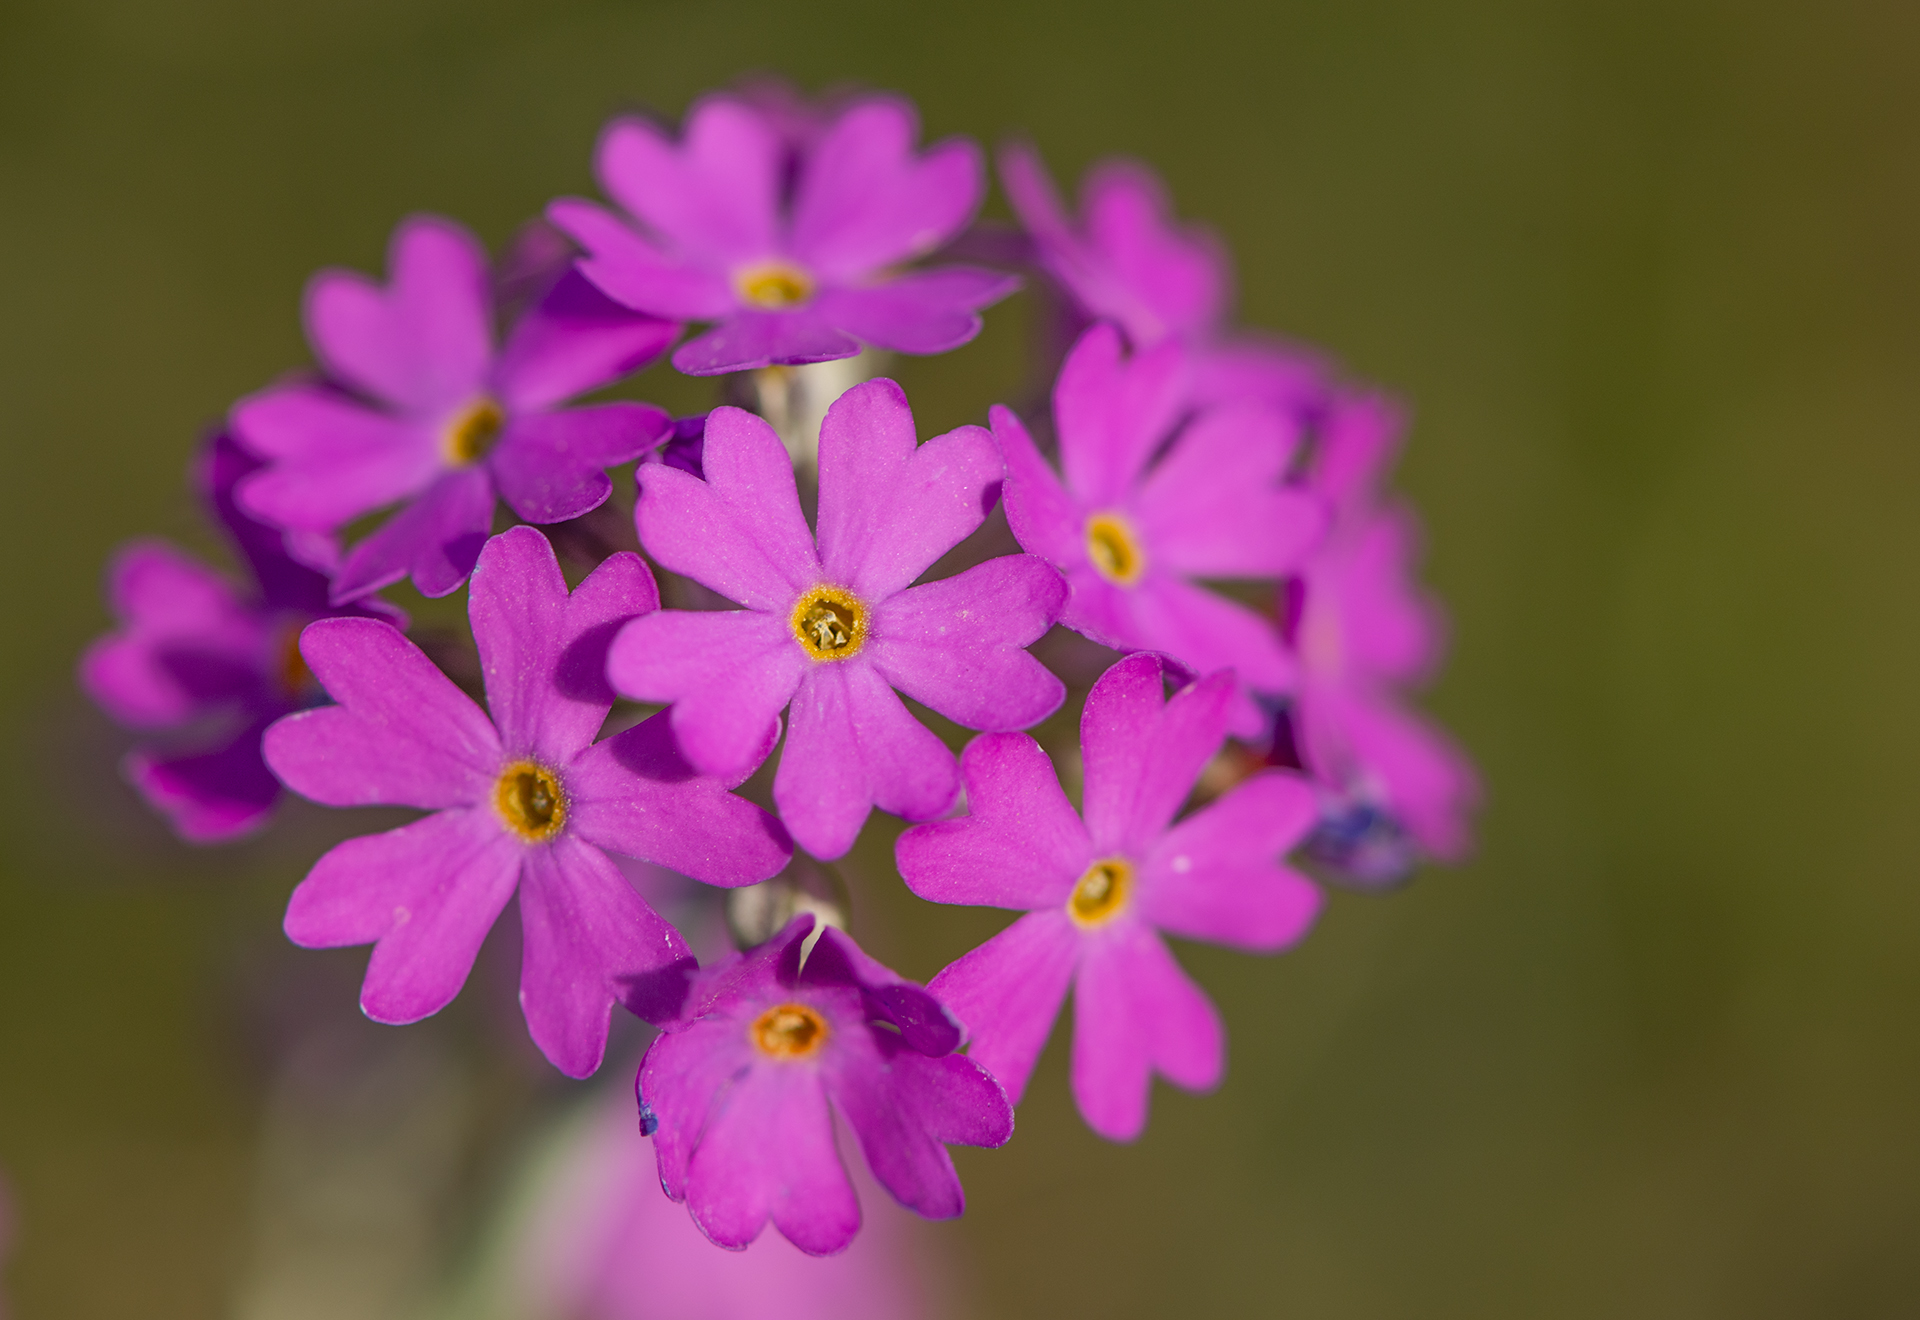 A detailed close up of a bird's-eye primrose (Primula farinosa) in the Wild Ingleborough project site.
Ingleborough, Yorkshire Dales, UK